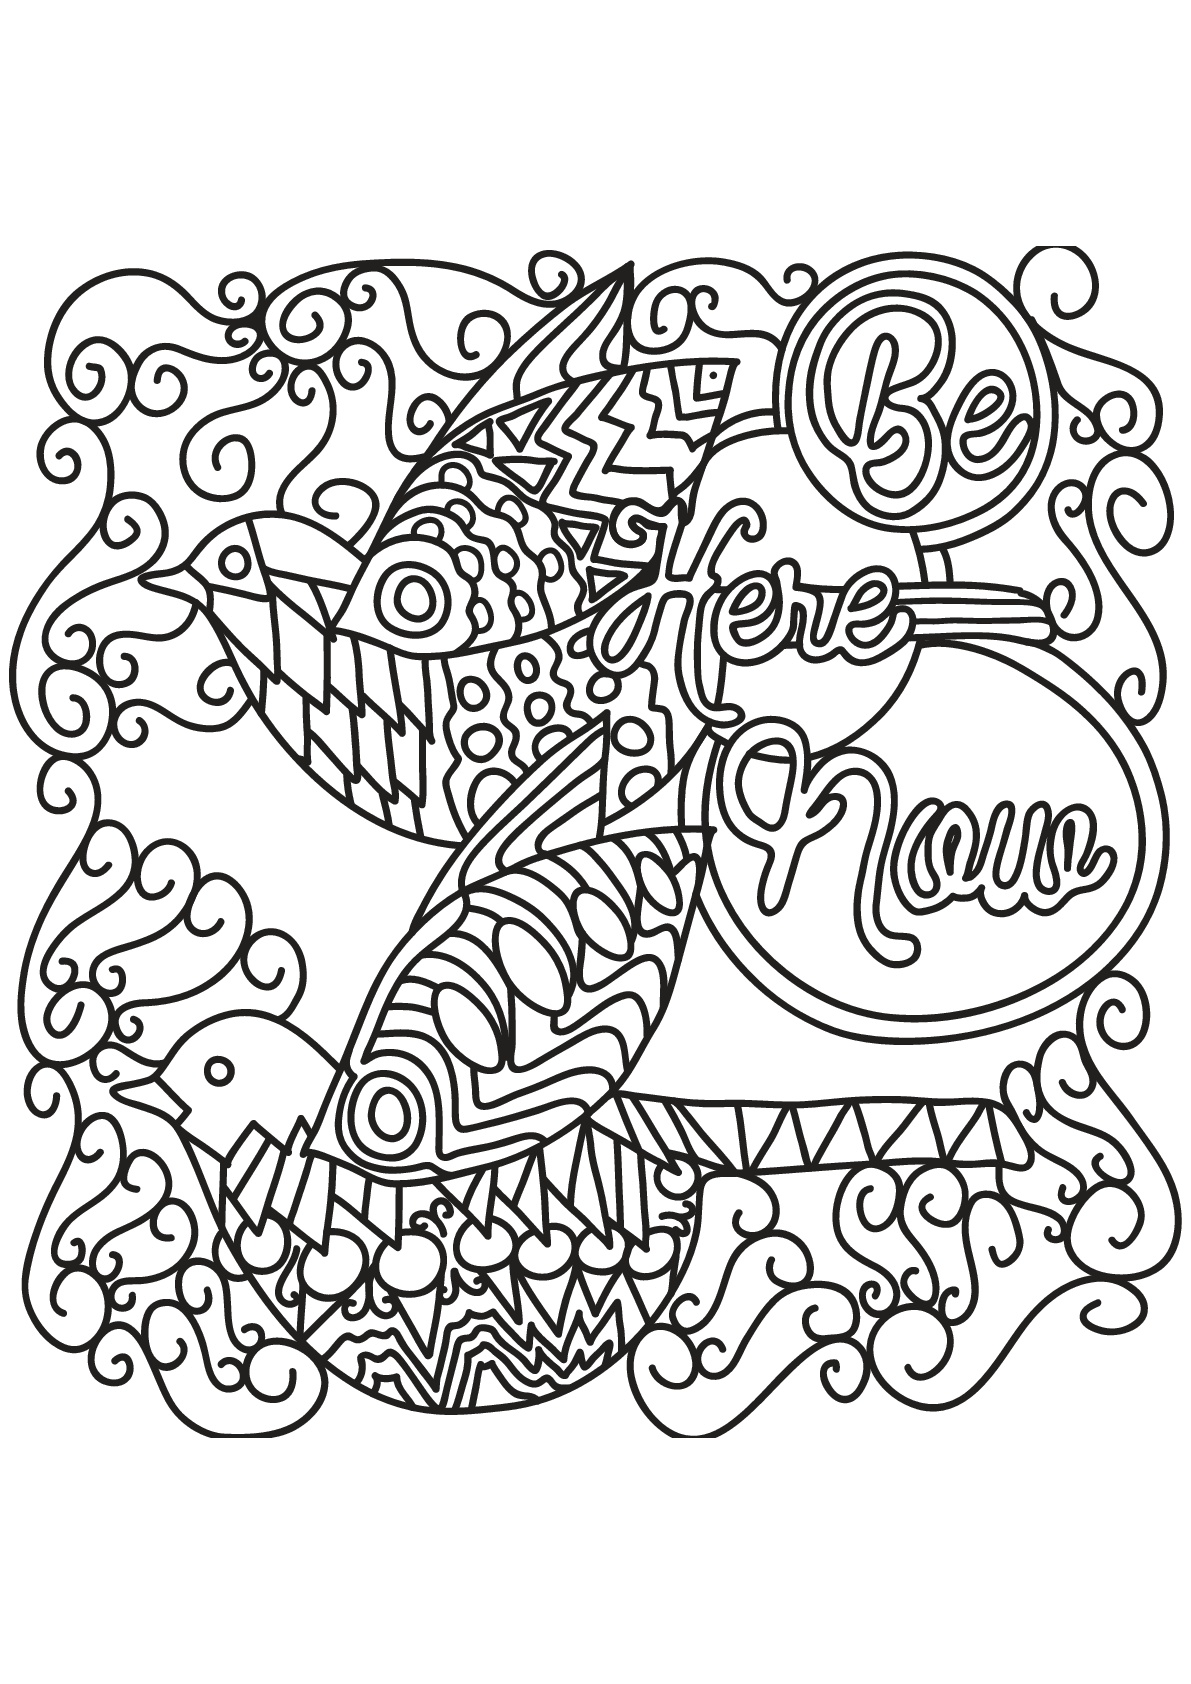 Free book quote 16 - Quotes Adult Coloring Pages